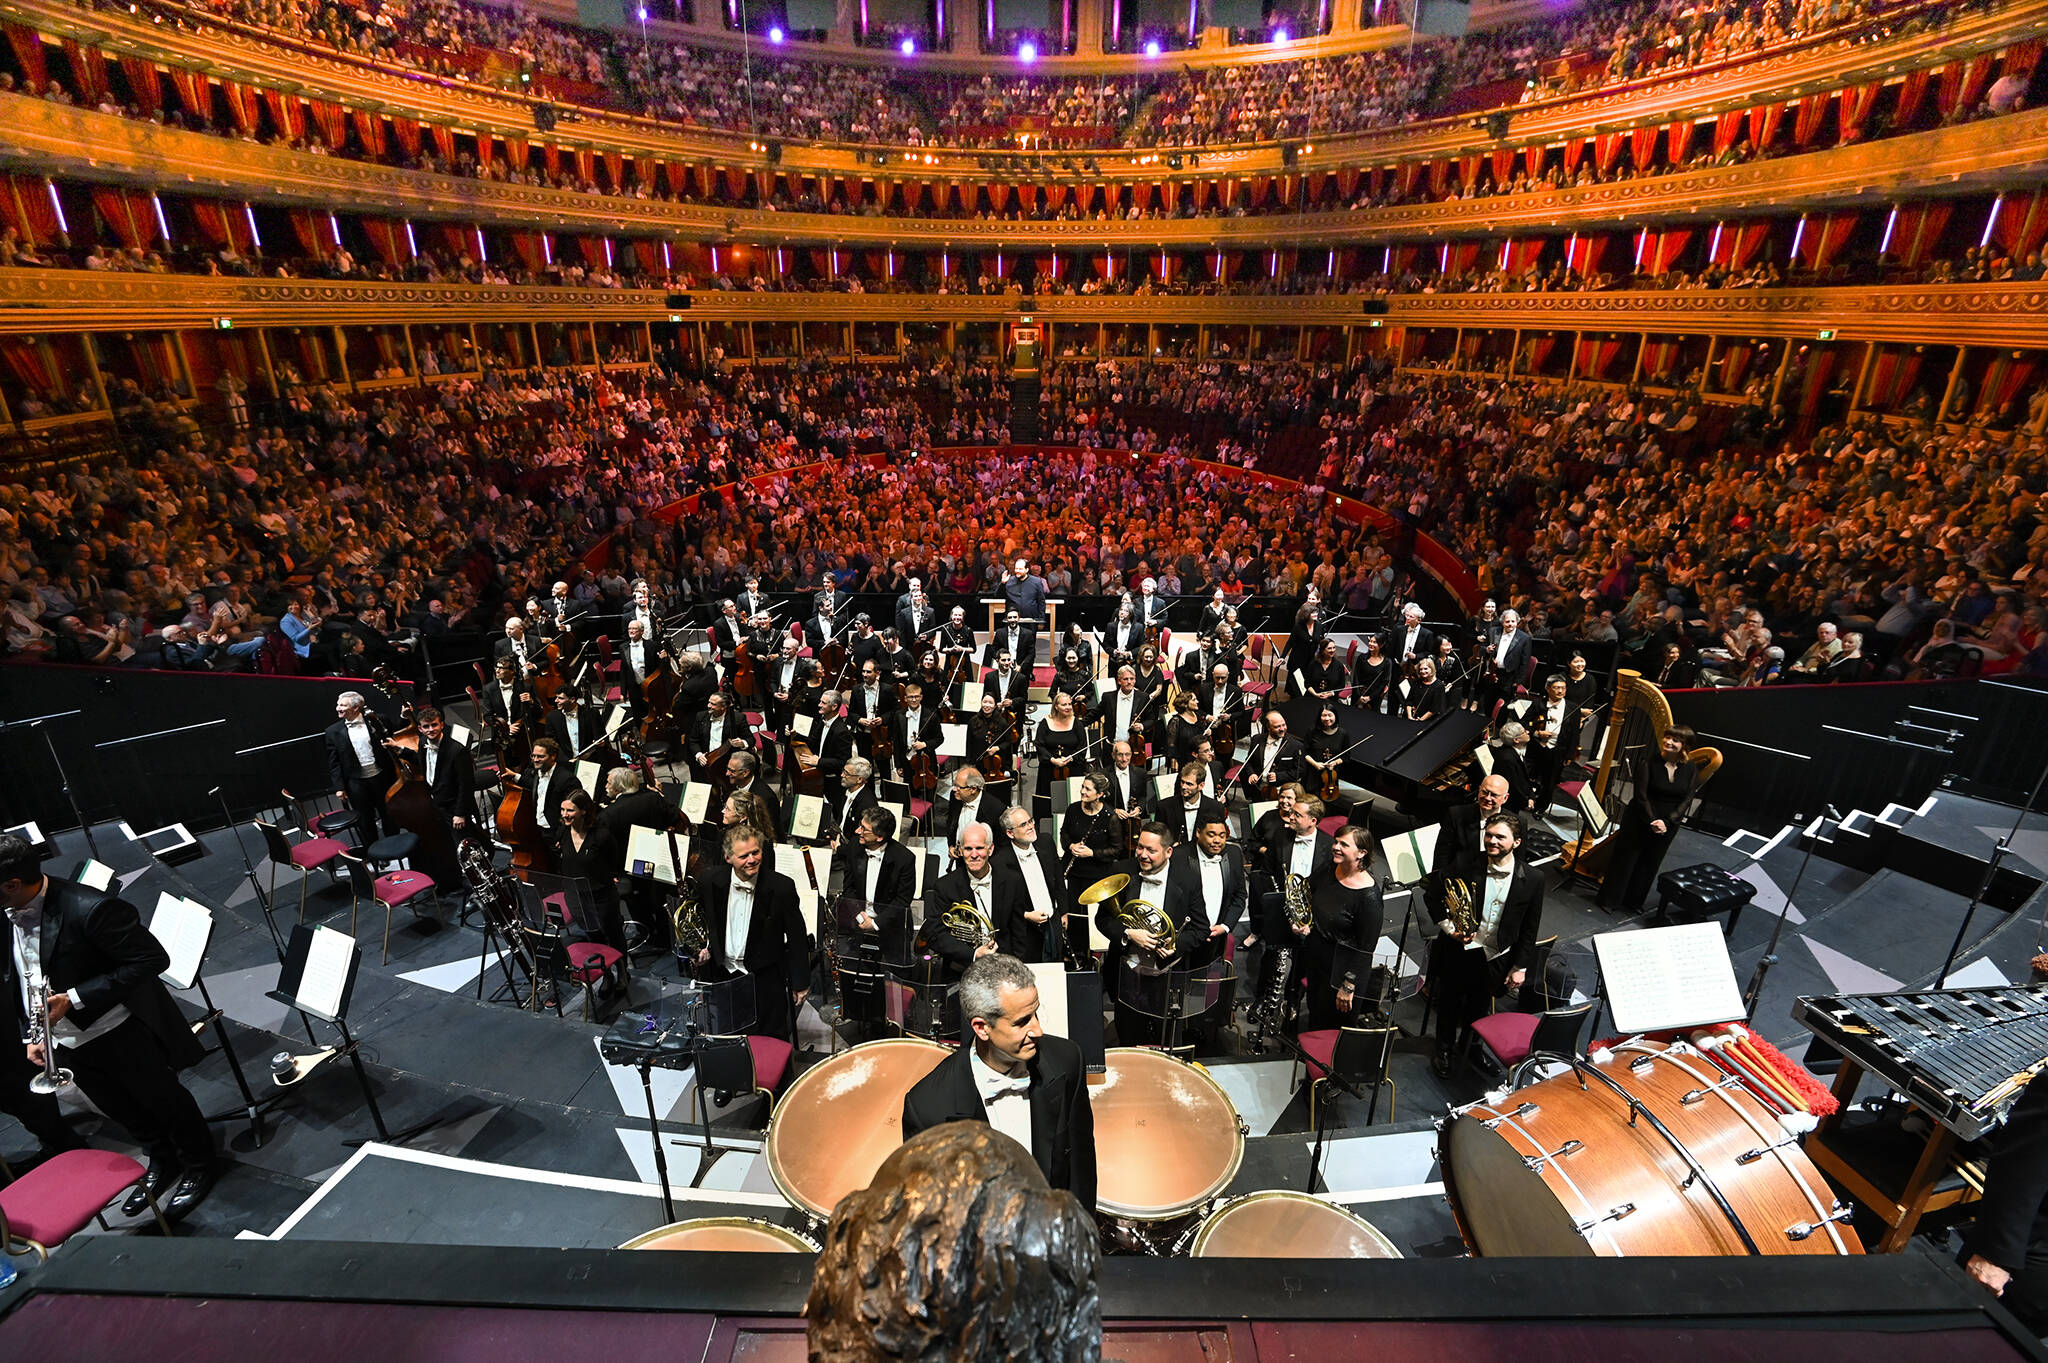 The BSO with the audience at Royal Albert Hall on Aug. 25, the orchestra's first performance on its European tour. (Courtesy Chris Christodoulou)